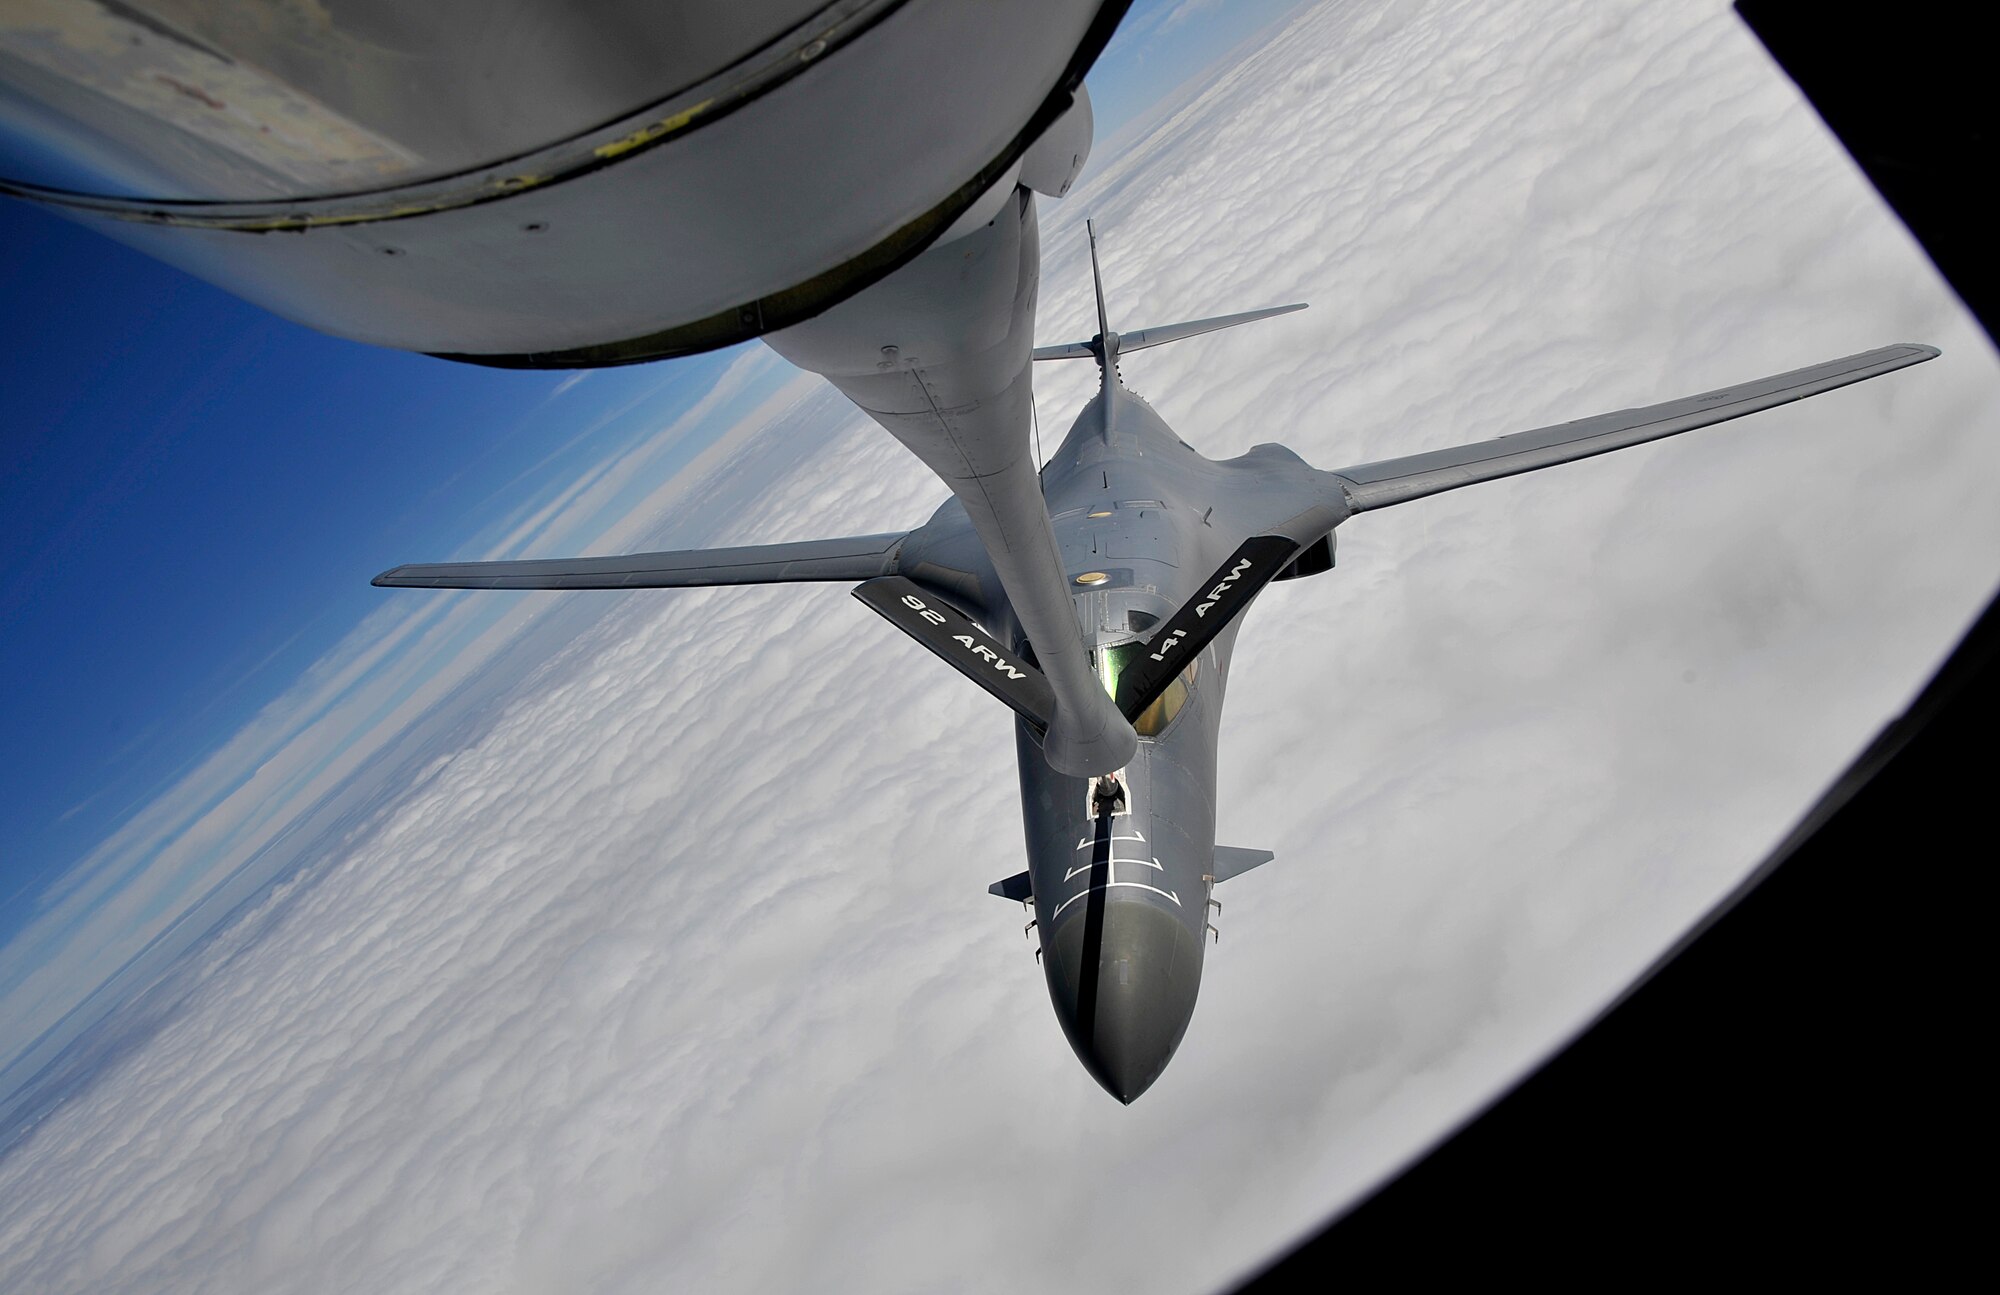 A KC-135 Stratotanker from Fairchild Air Force Base refuels a B-1B Lancer during a training exercise Sept. 23, 2014, over South Dakota. For more than 50 years the KC-135 has provided the core aerial refueling capability for the Air Force. The aircraft can travel up to 1,500 miles with 150,000 pounds of transfer fuel, which enables the Air Force to project rapid, flexible military power. The B-1B is assigned to Ellsworth Air Force Base, South Dakota. (U.S. Air Force photo by Senior Airman Mary O'Dell)